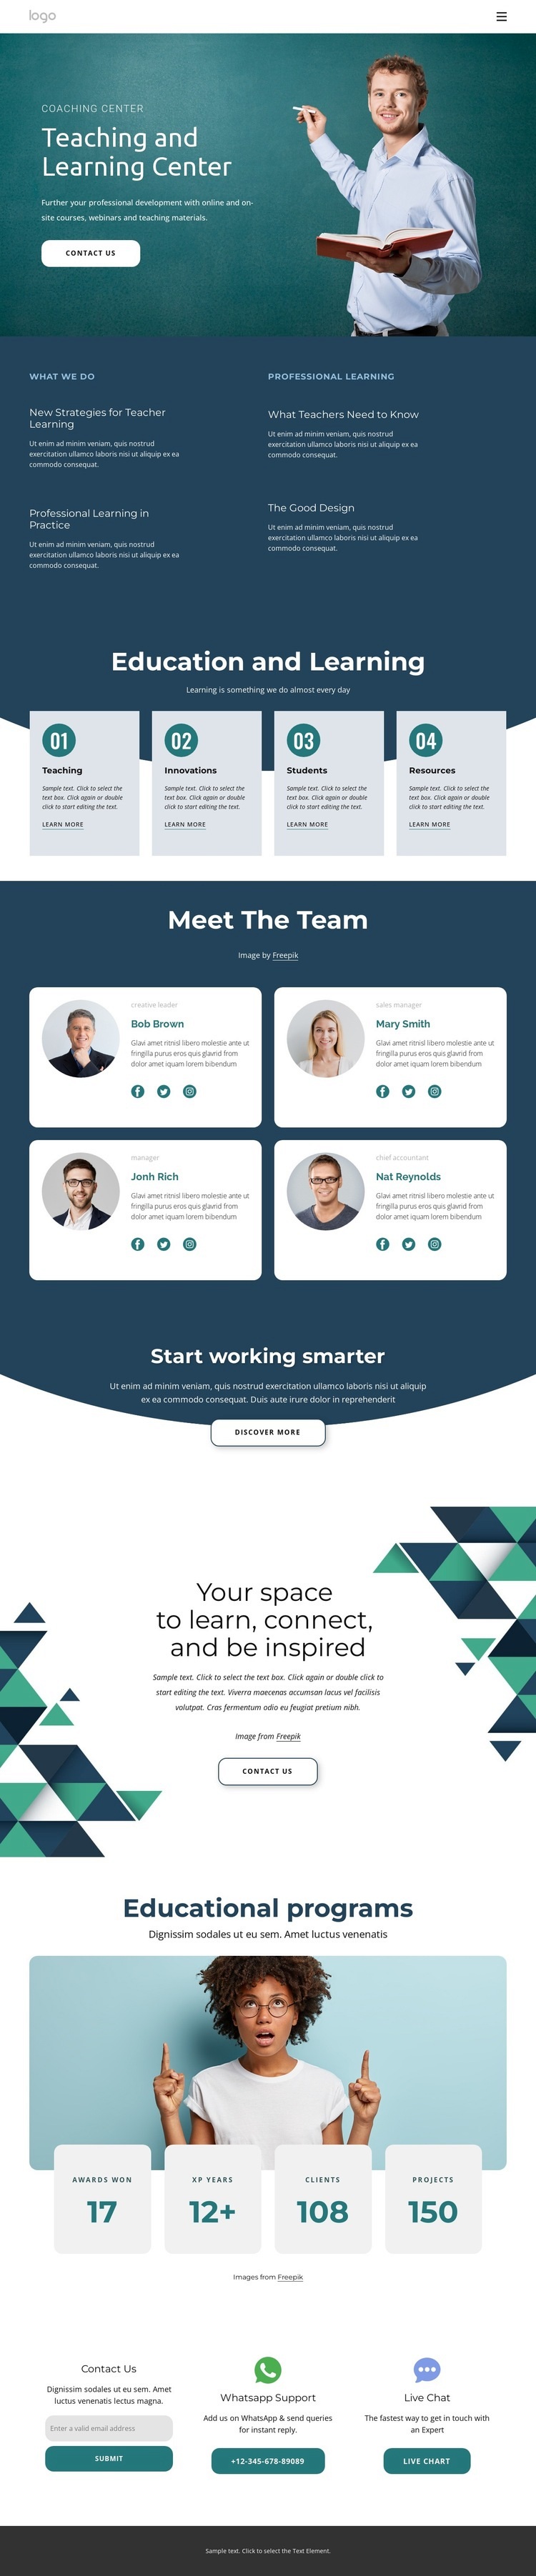 Teaching and learning center Squarespace Template Alternative